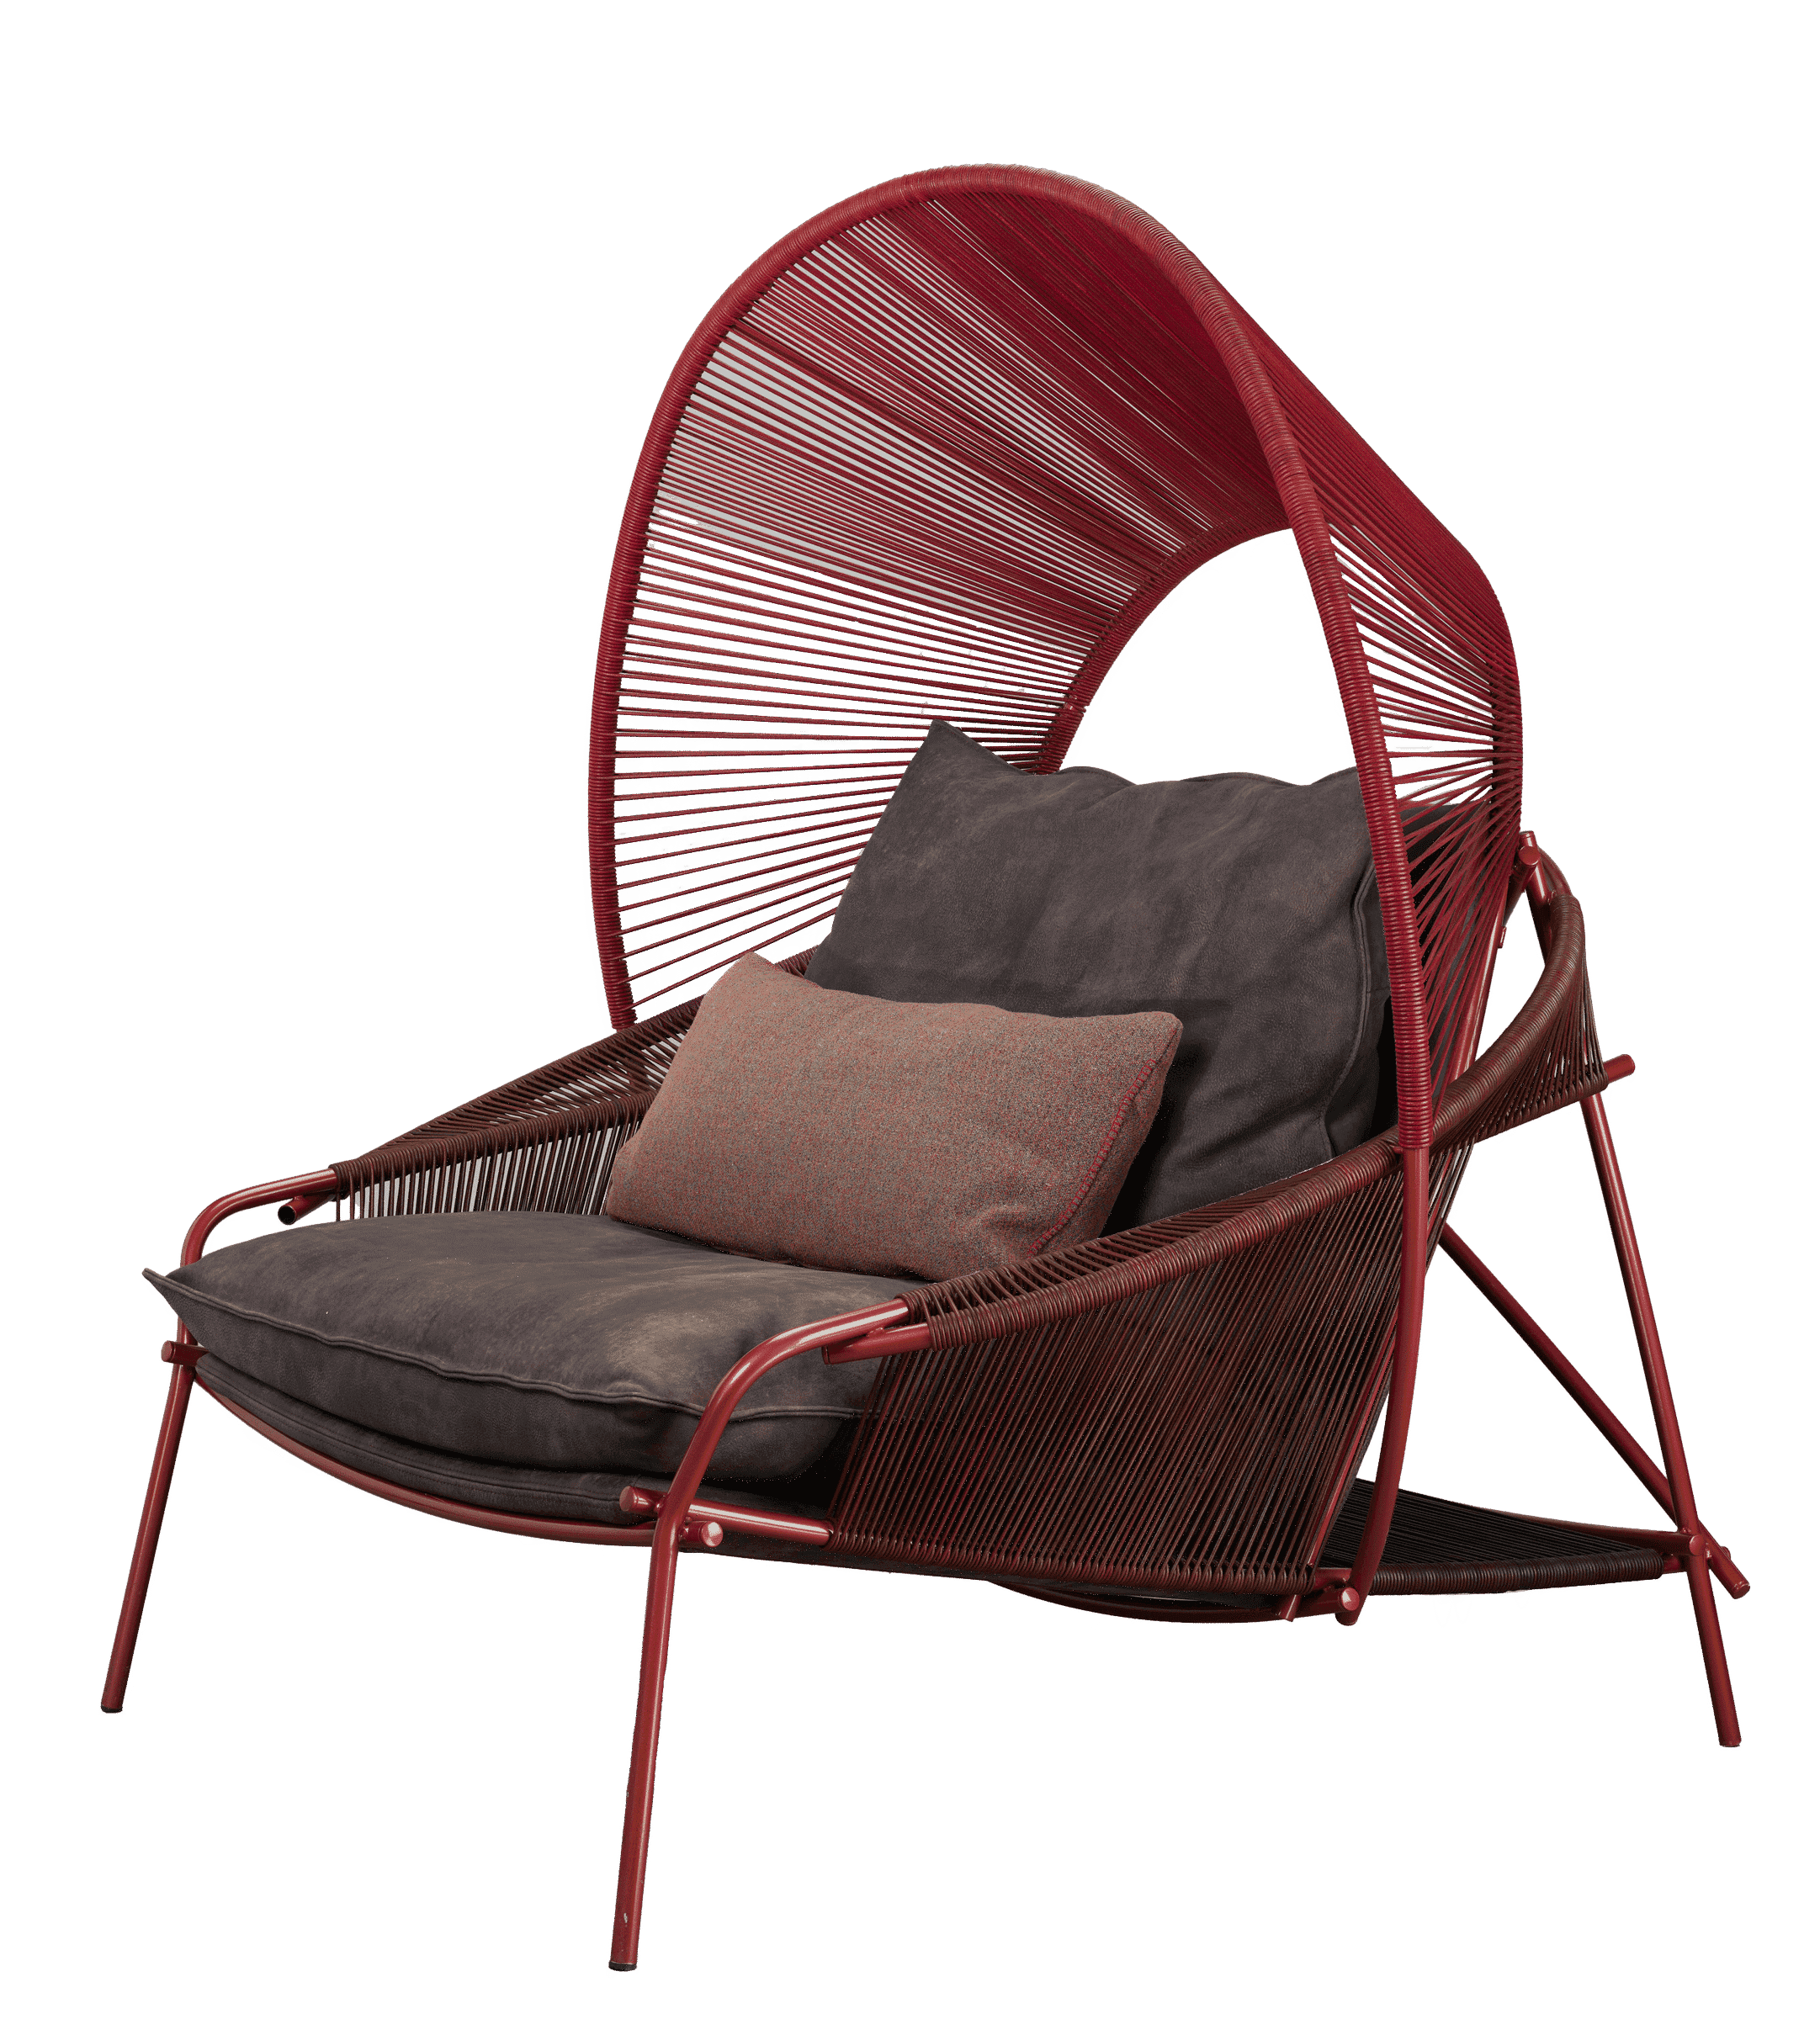 Modern wicker peacock chair with cushions against a grey background